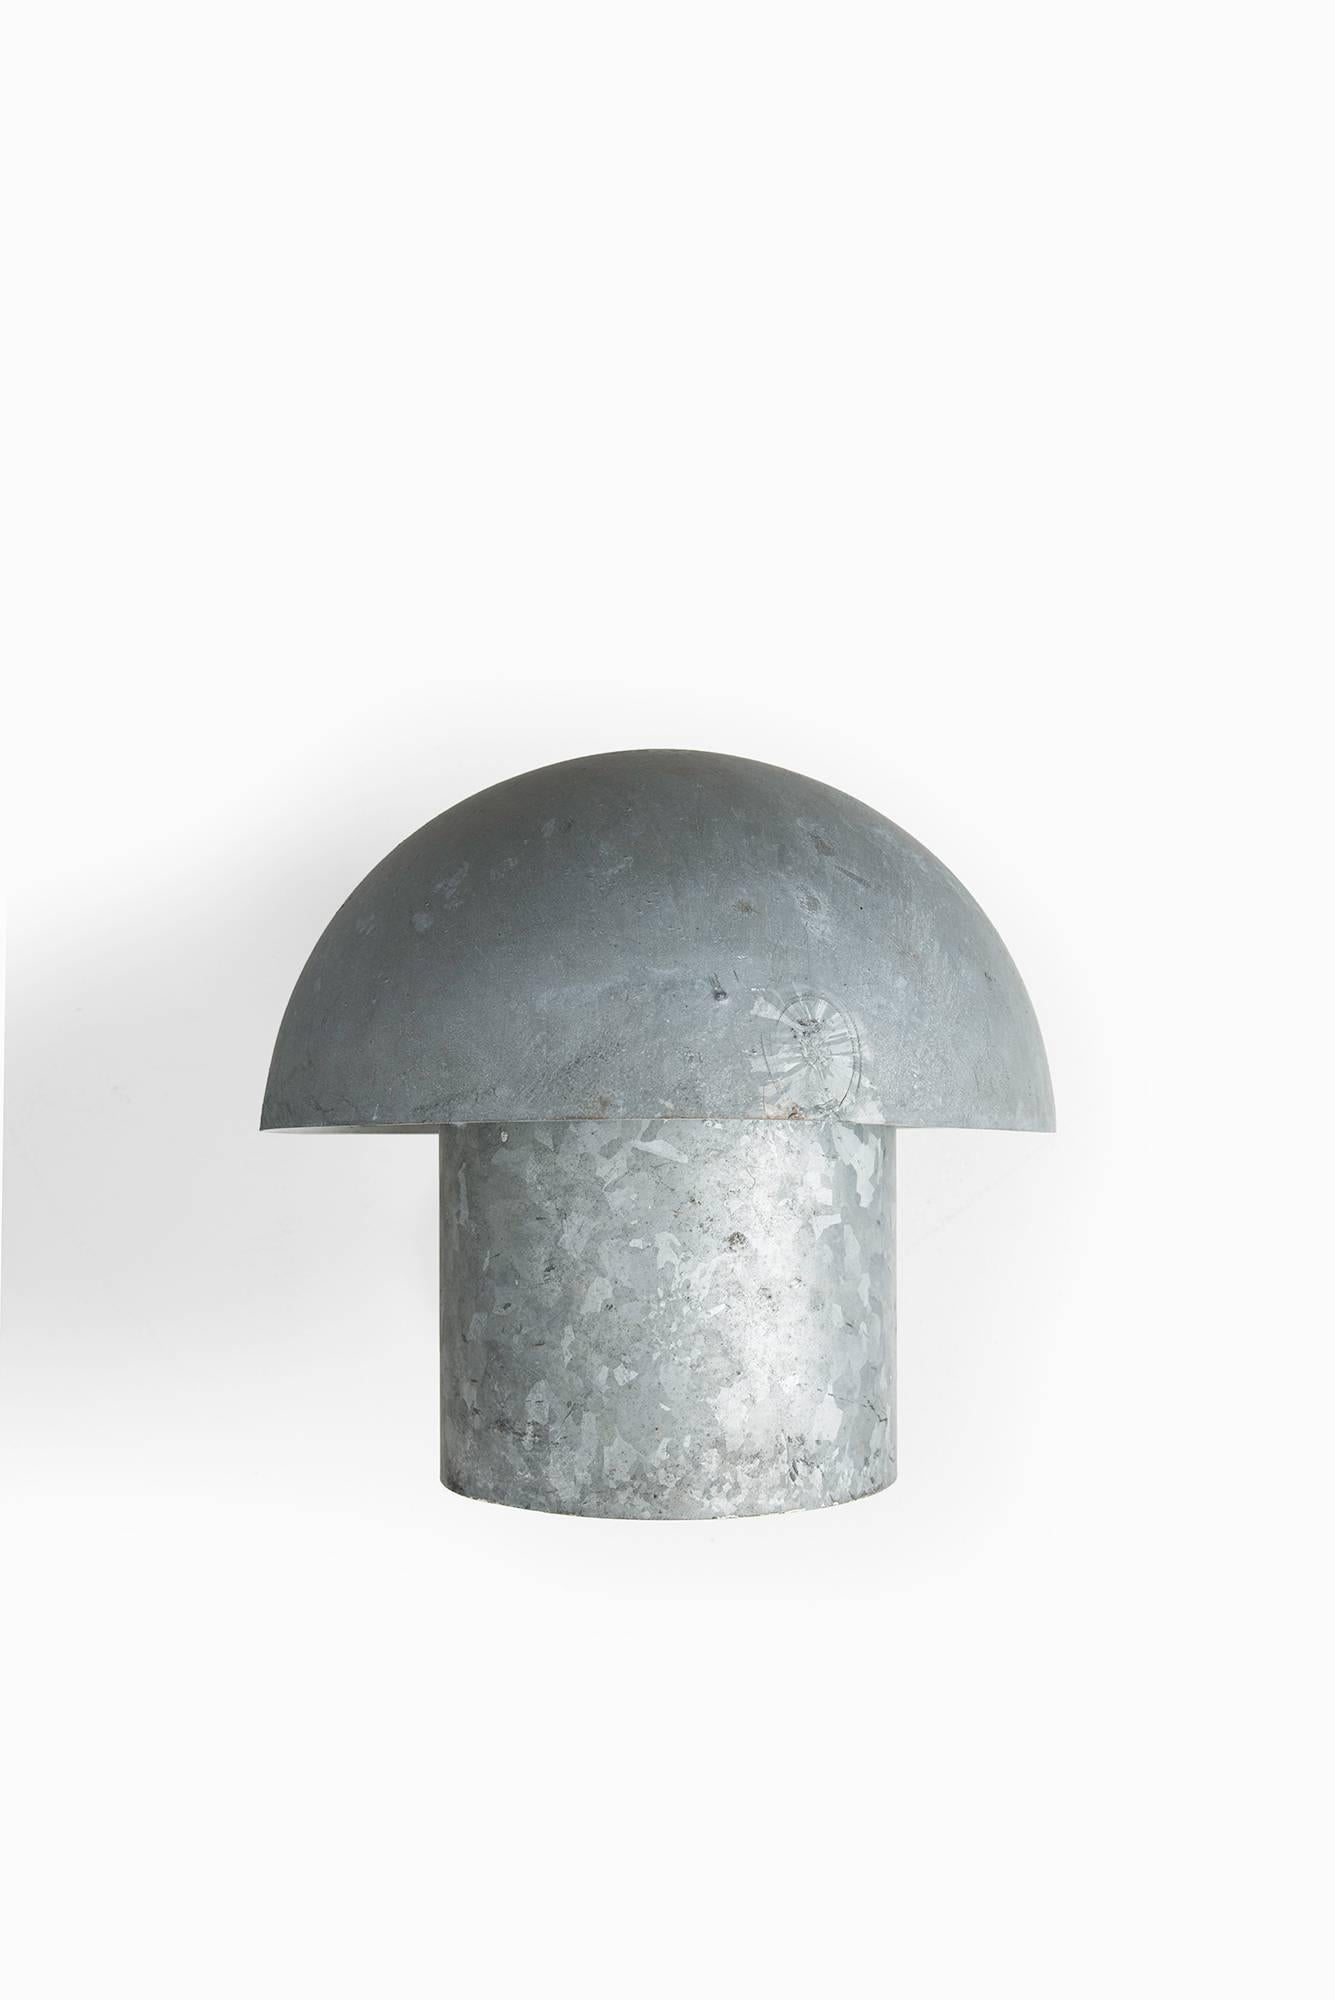 A pair of outdoor wall lamps in galvanised steel designed by Bjarne Bech. Produced by Louis Poulsen in Denmark.